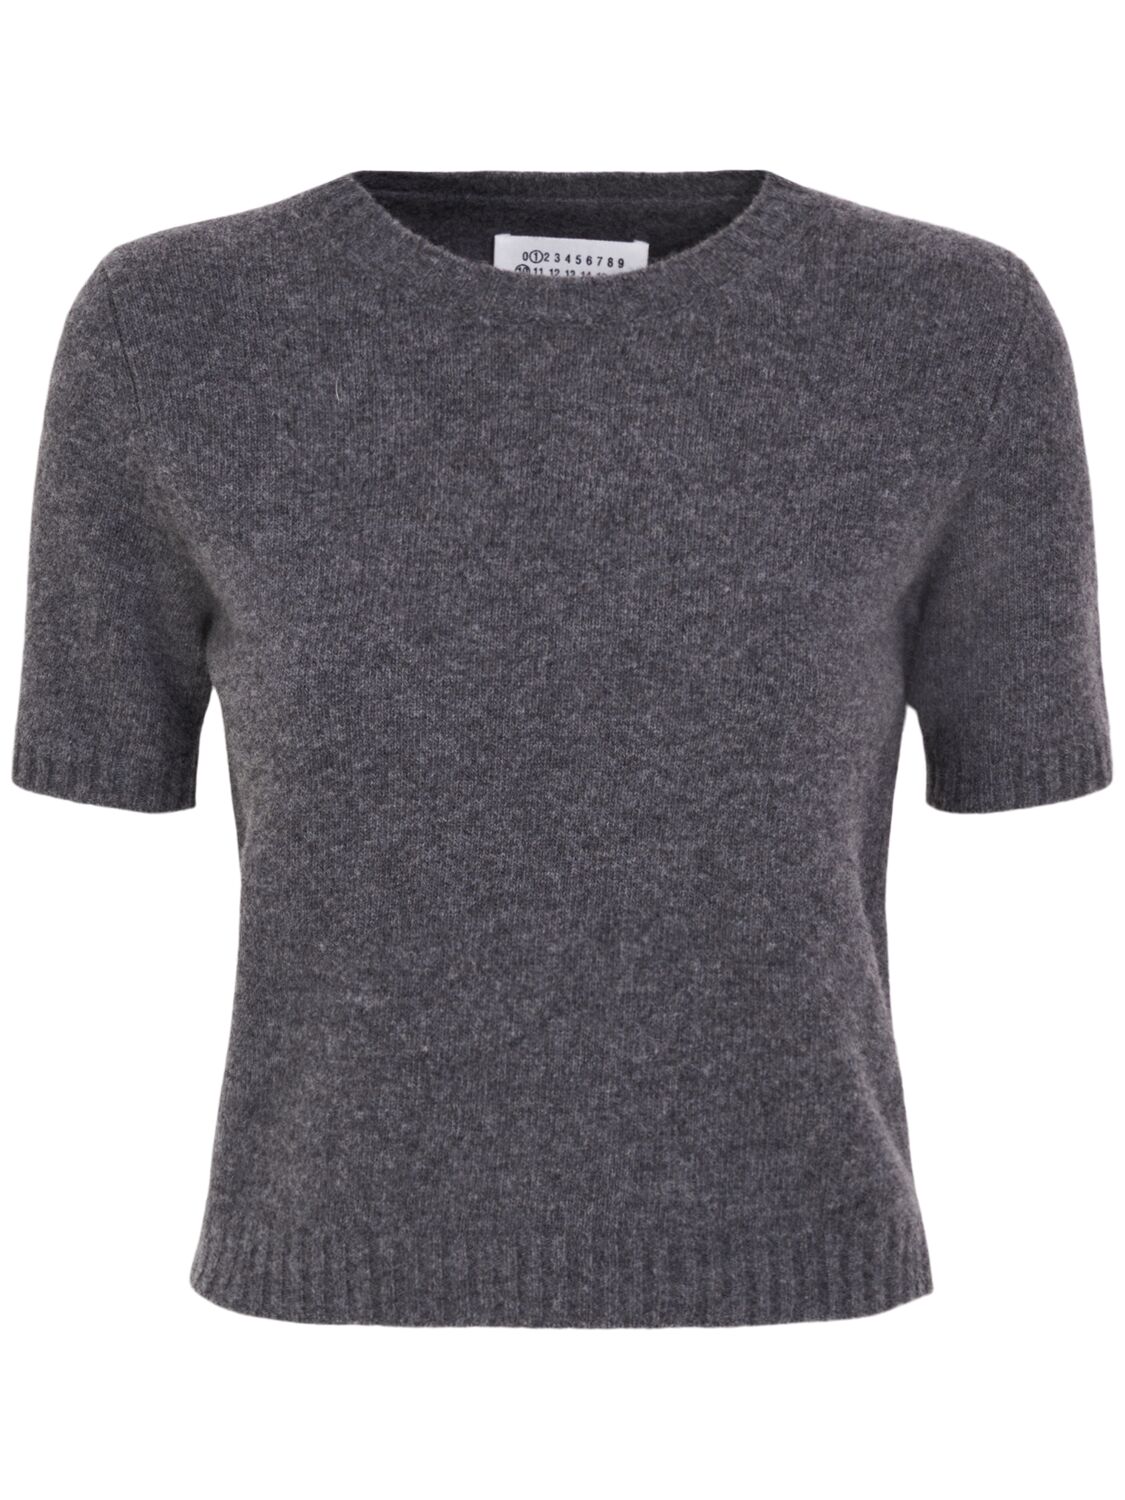 Maison Margiela Washed Wool Knit Top In Gray